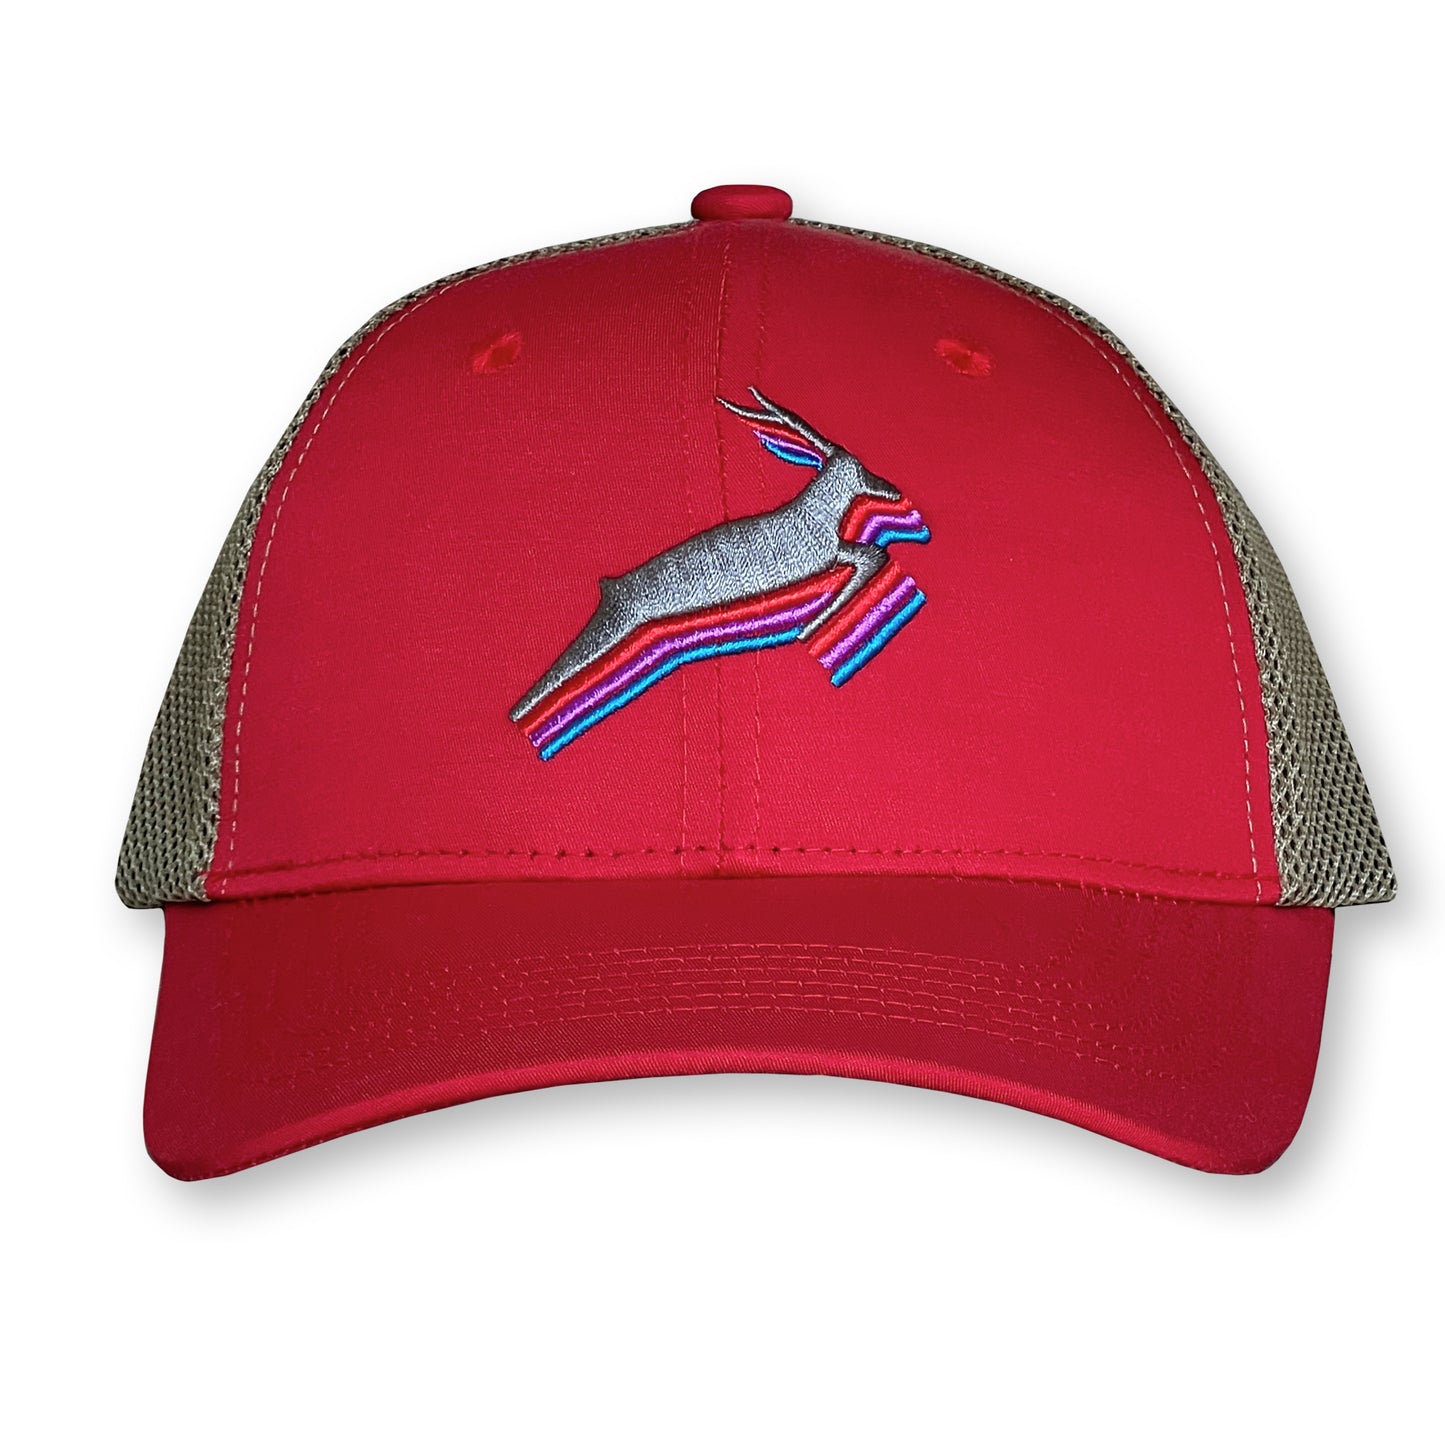 Antelope Trucker Hat / Cayenne Polycotton Blend with Oat Mesh and Pewter Antelope